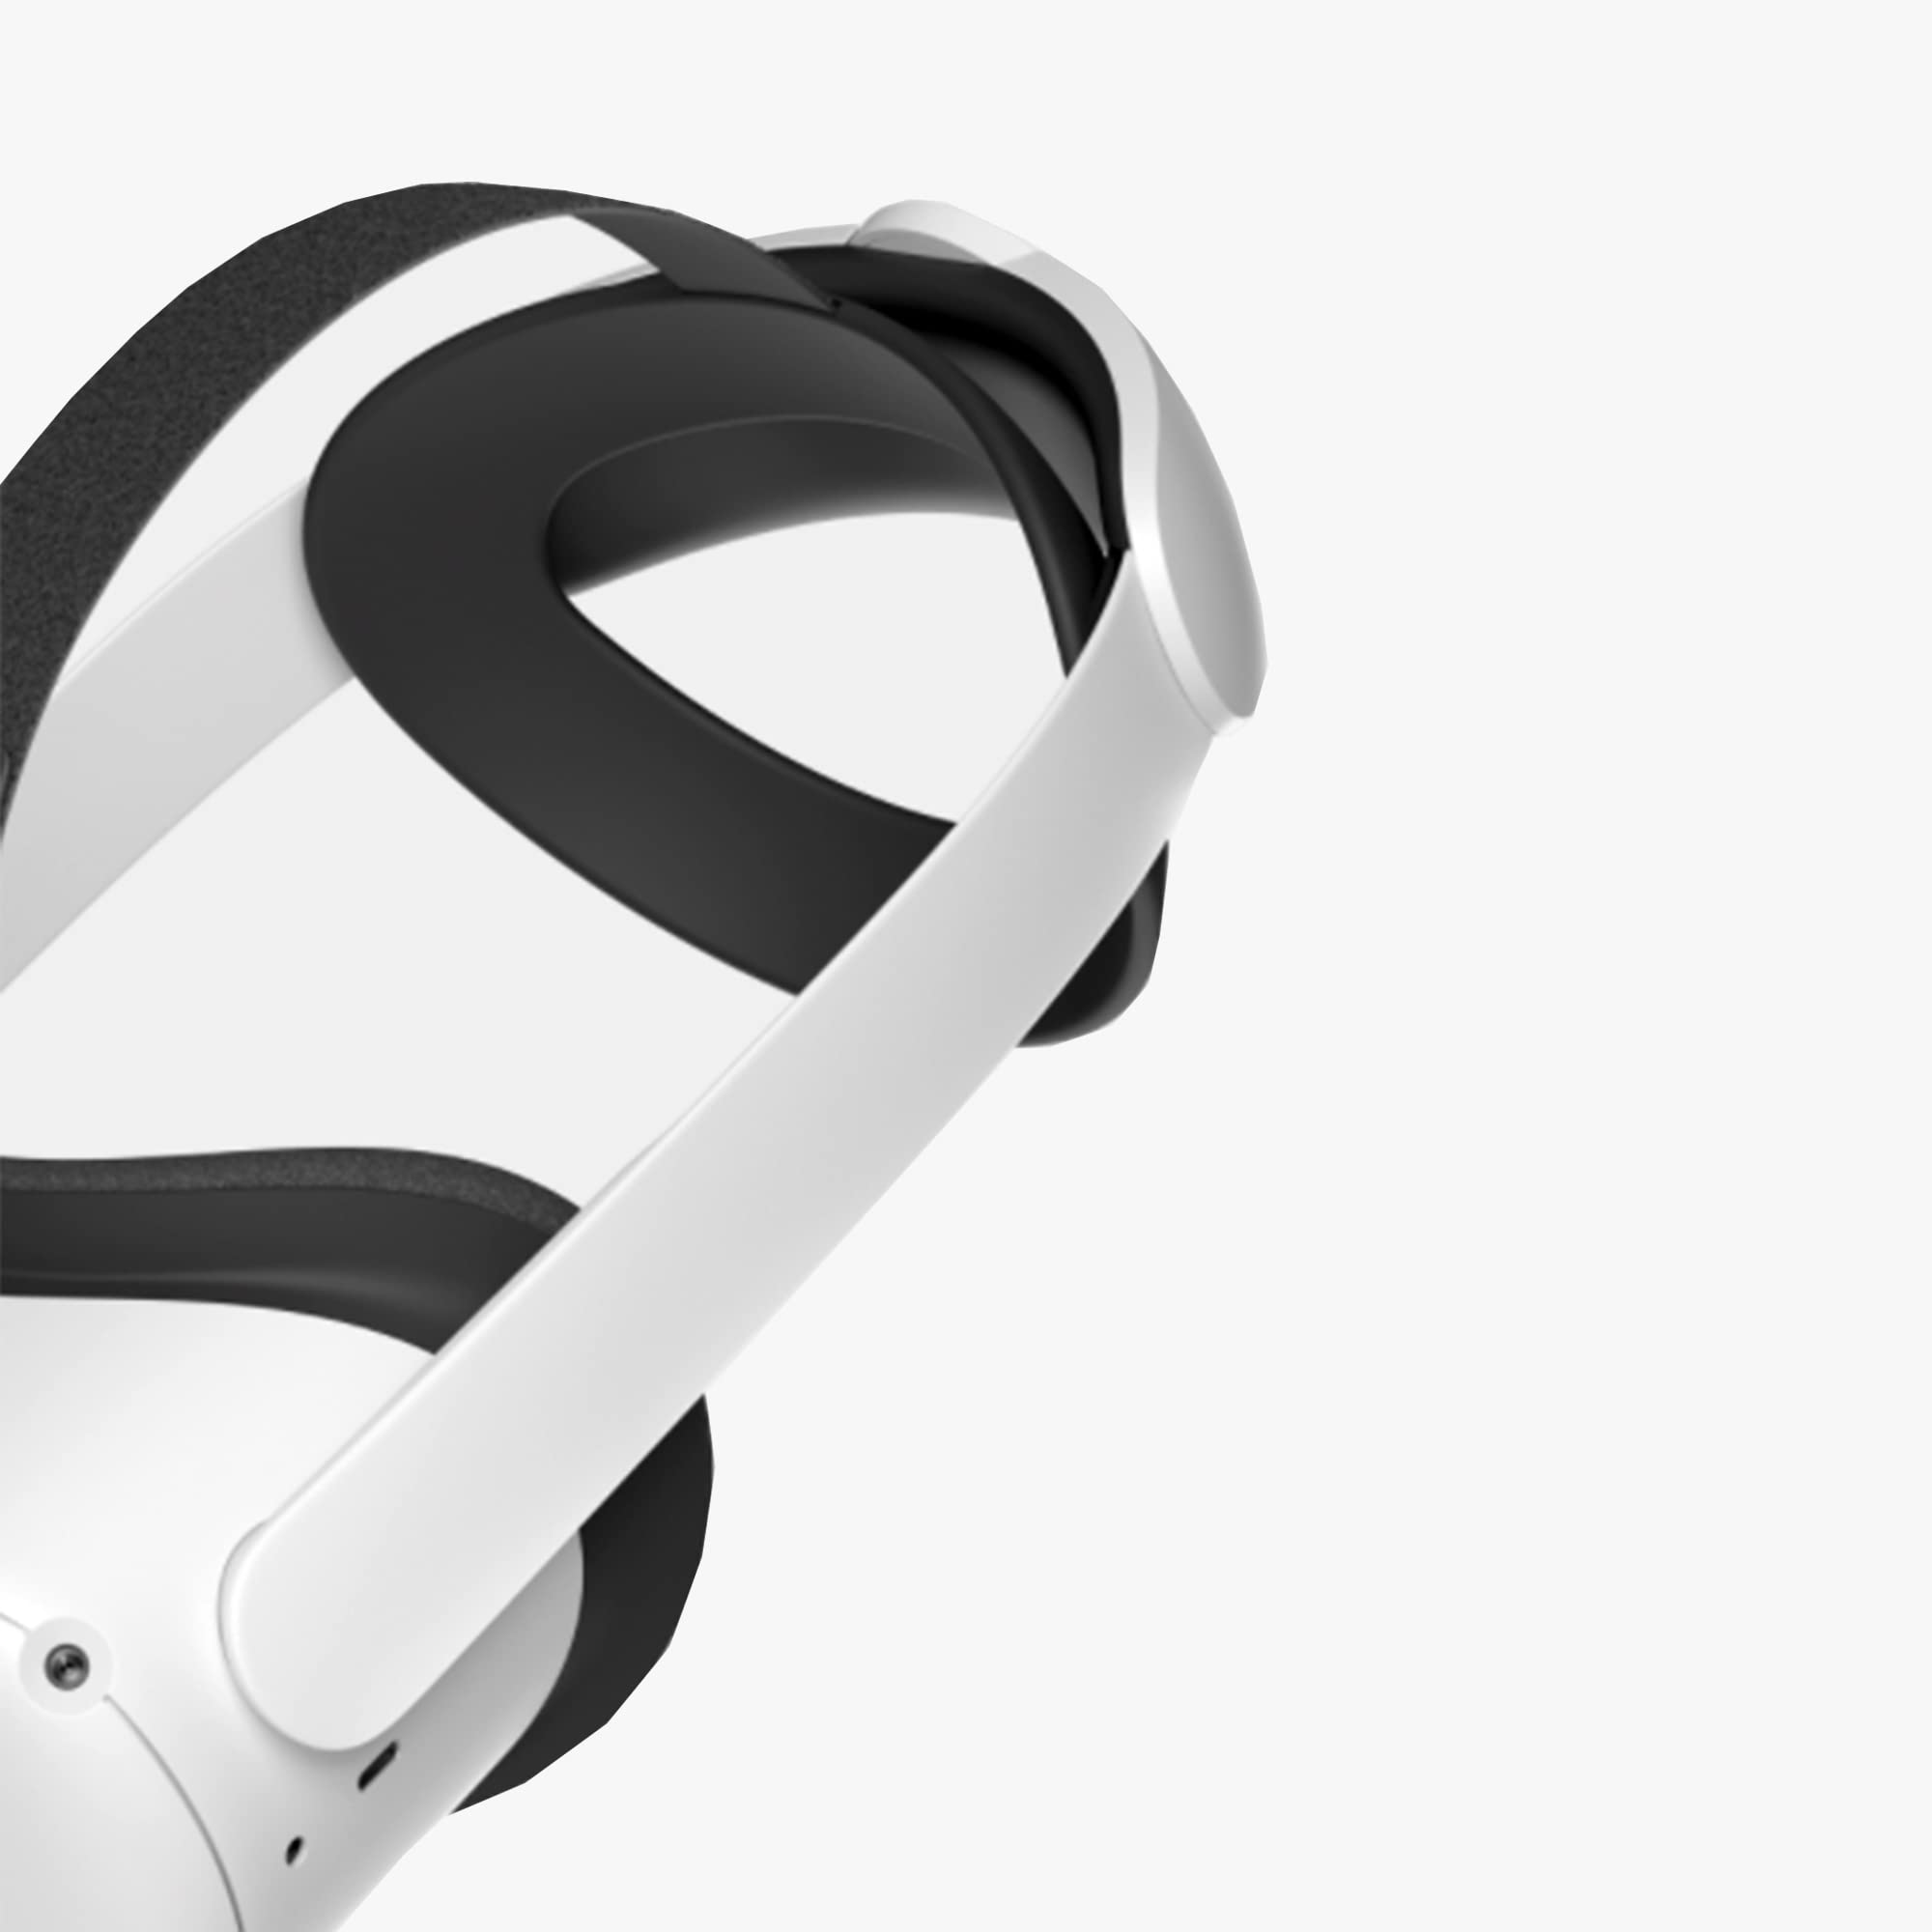 Quest 2 Elite Strap for Enhanced Support and Comfort in VR